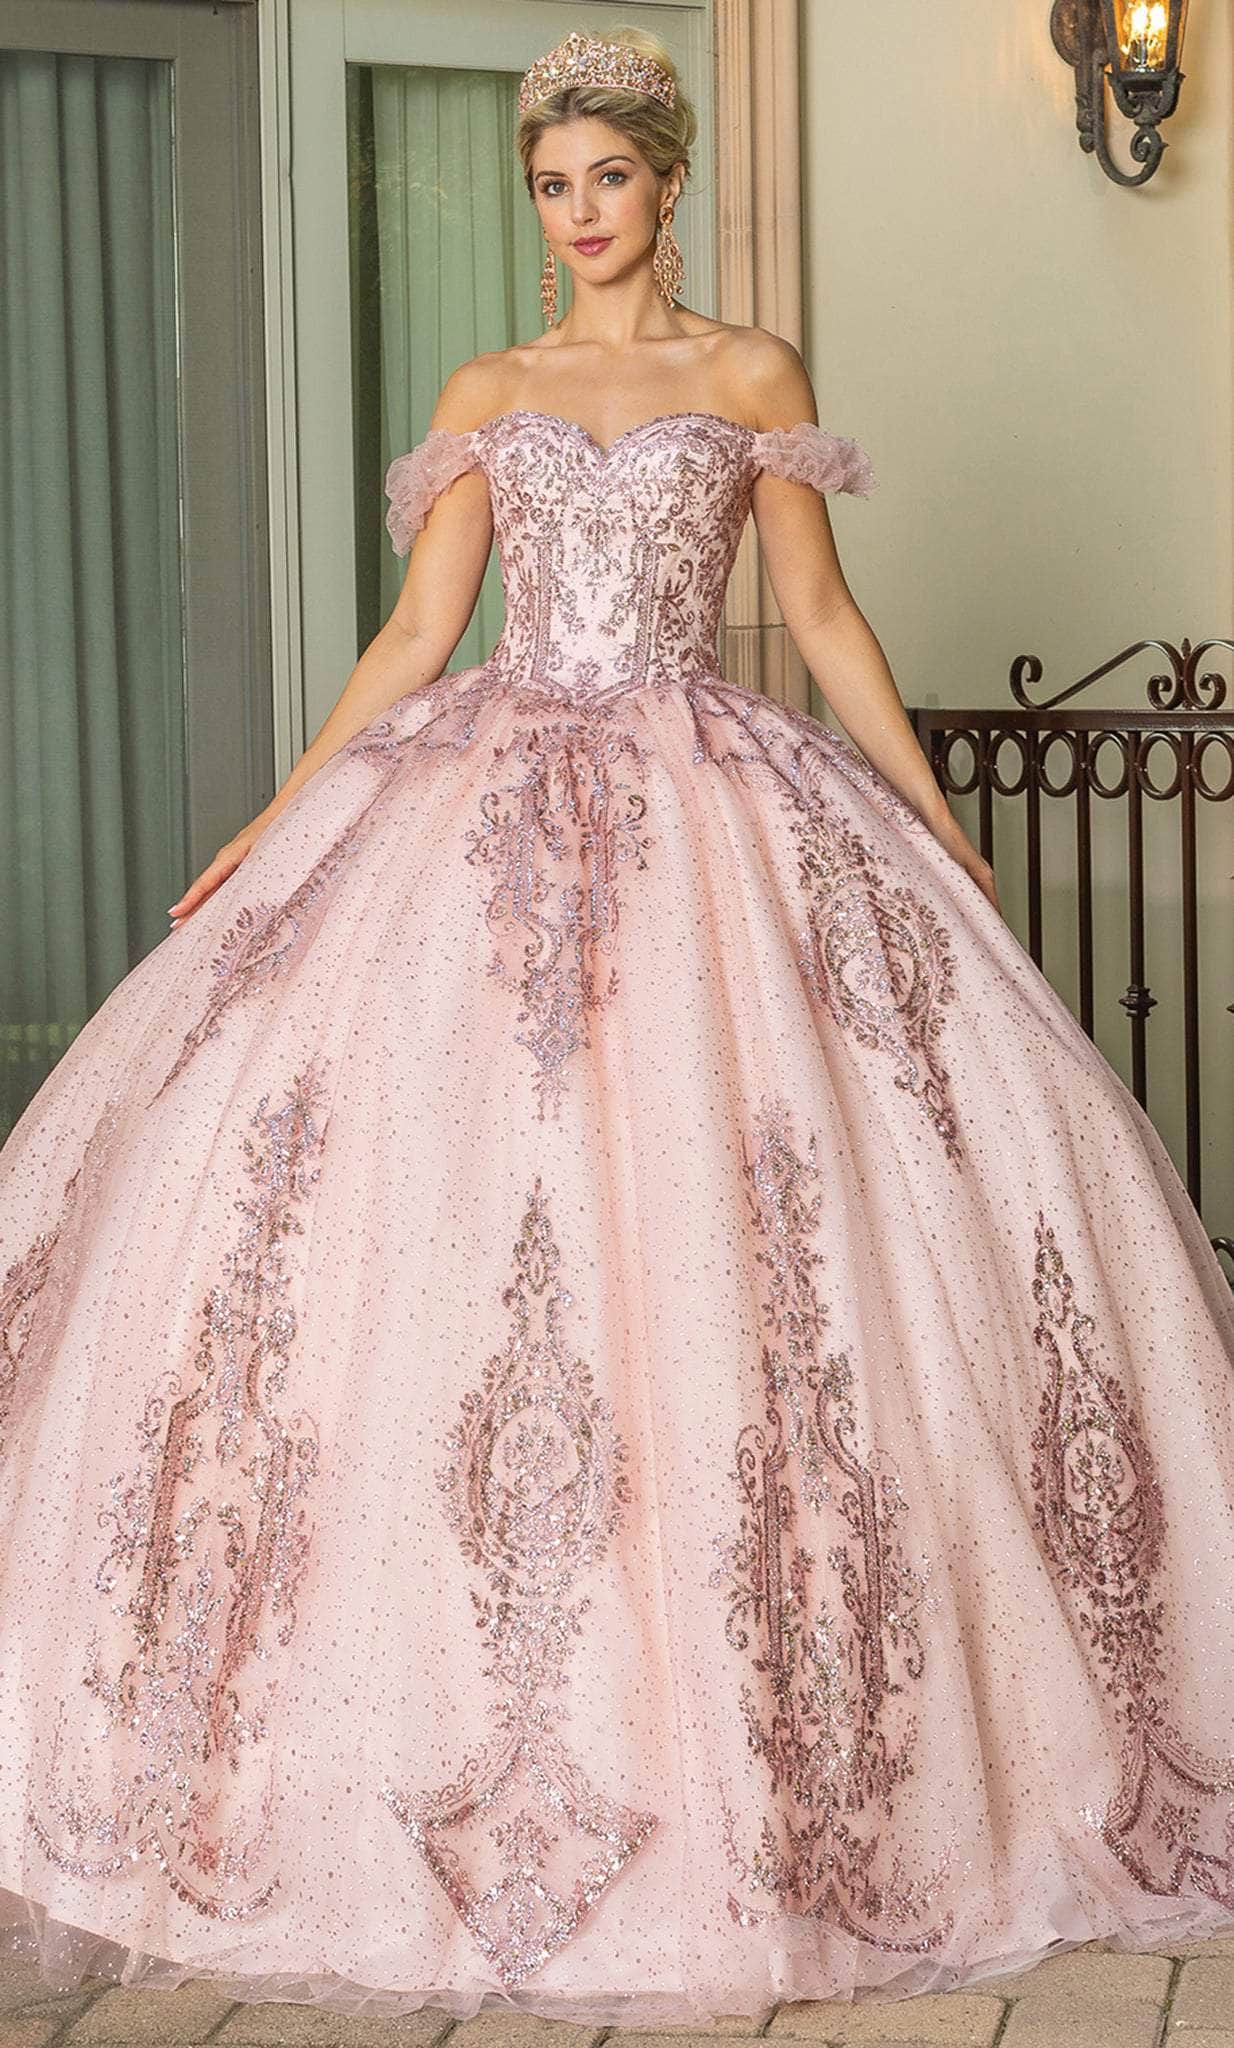 Dancing Queen 1803 - Ruffled Off-Shoulder Lace-Up Back Ballgown
